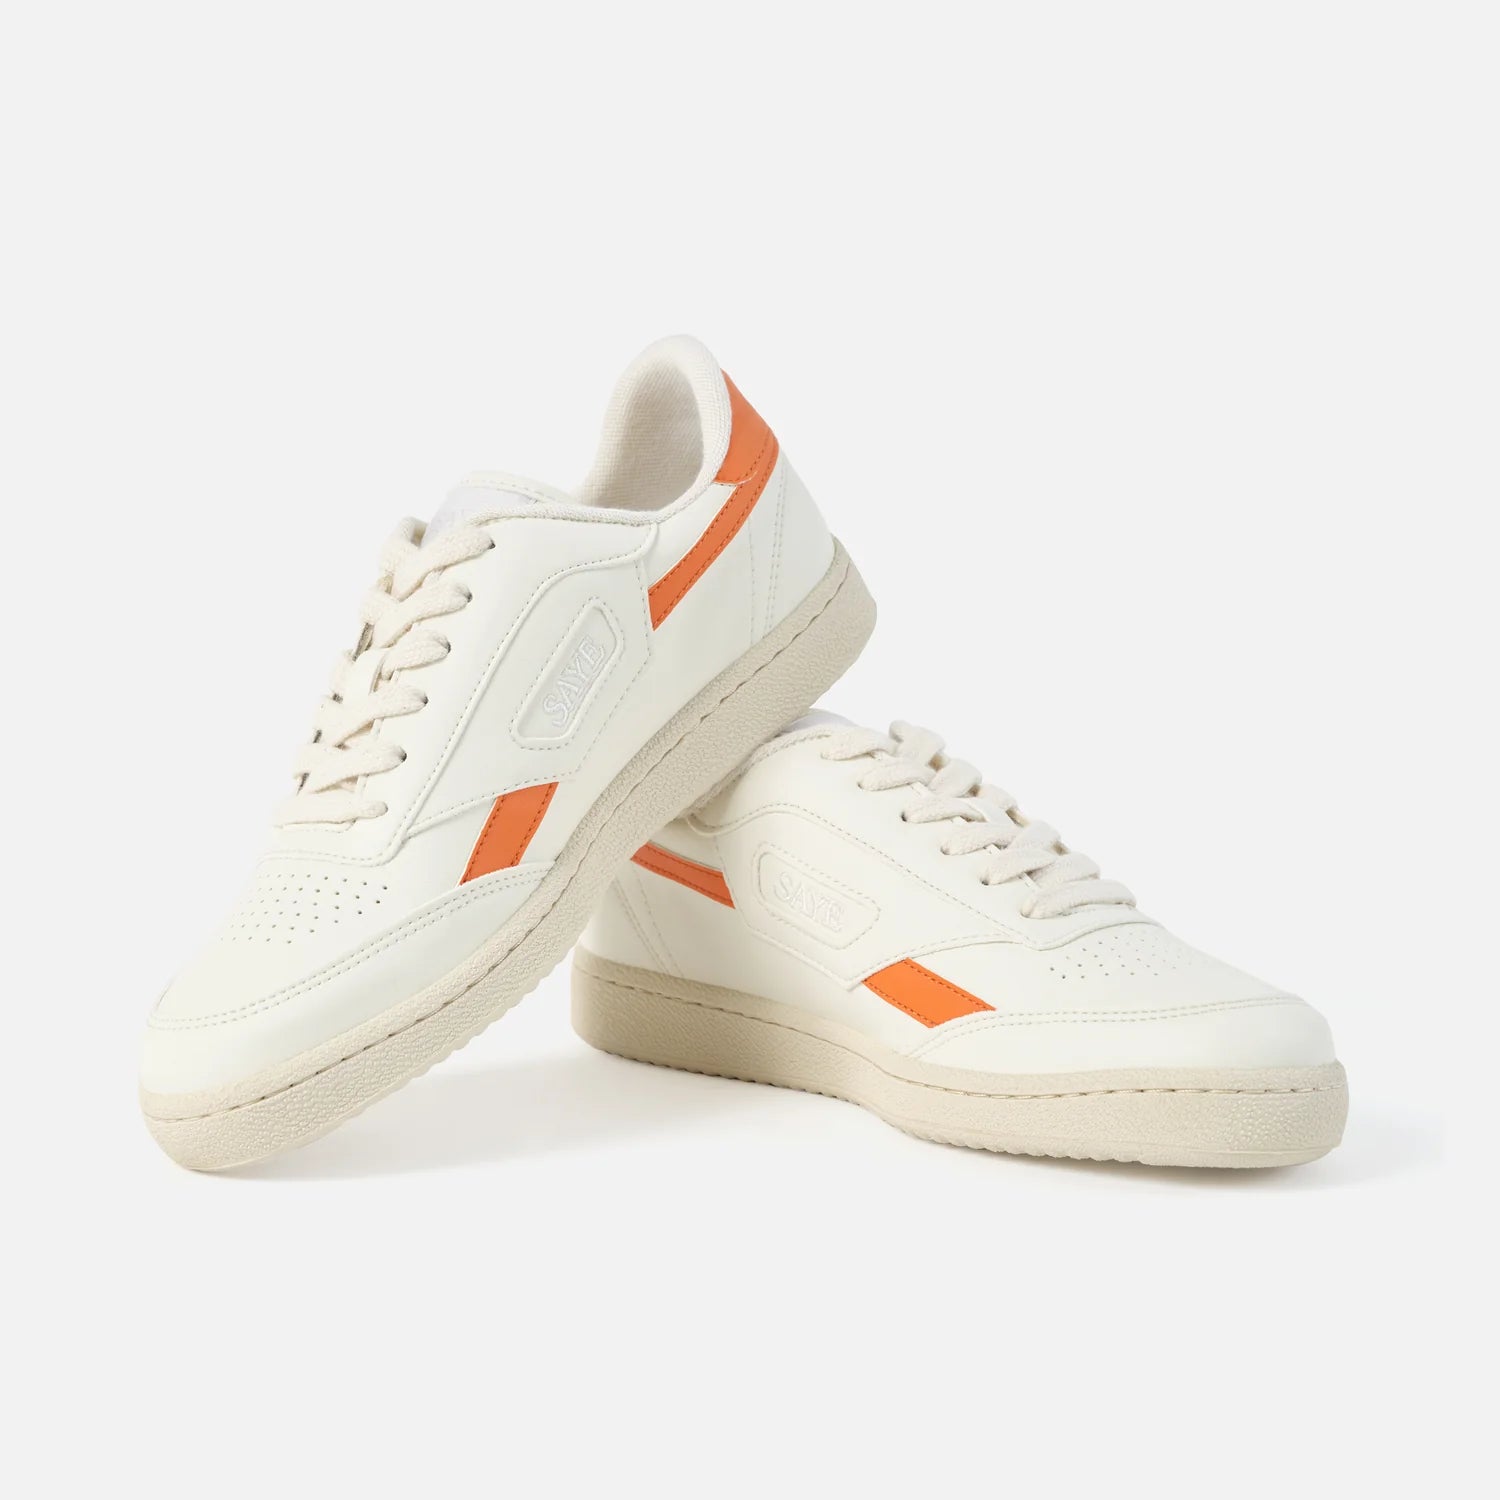 A pair of Modelo '89 Sneakers - Orange by SAYE on a white background.